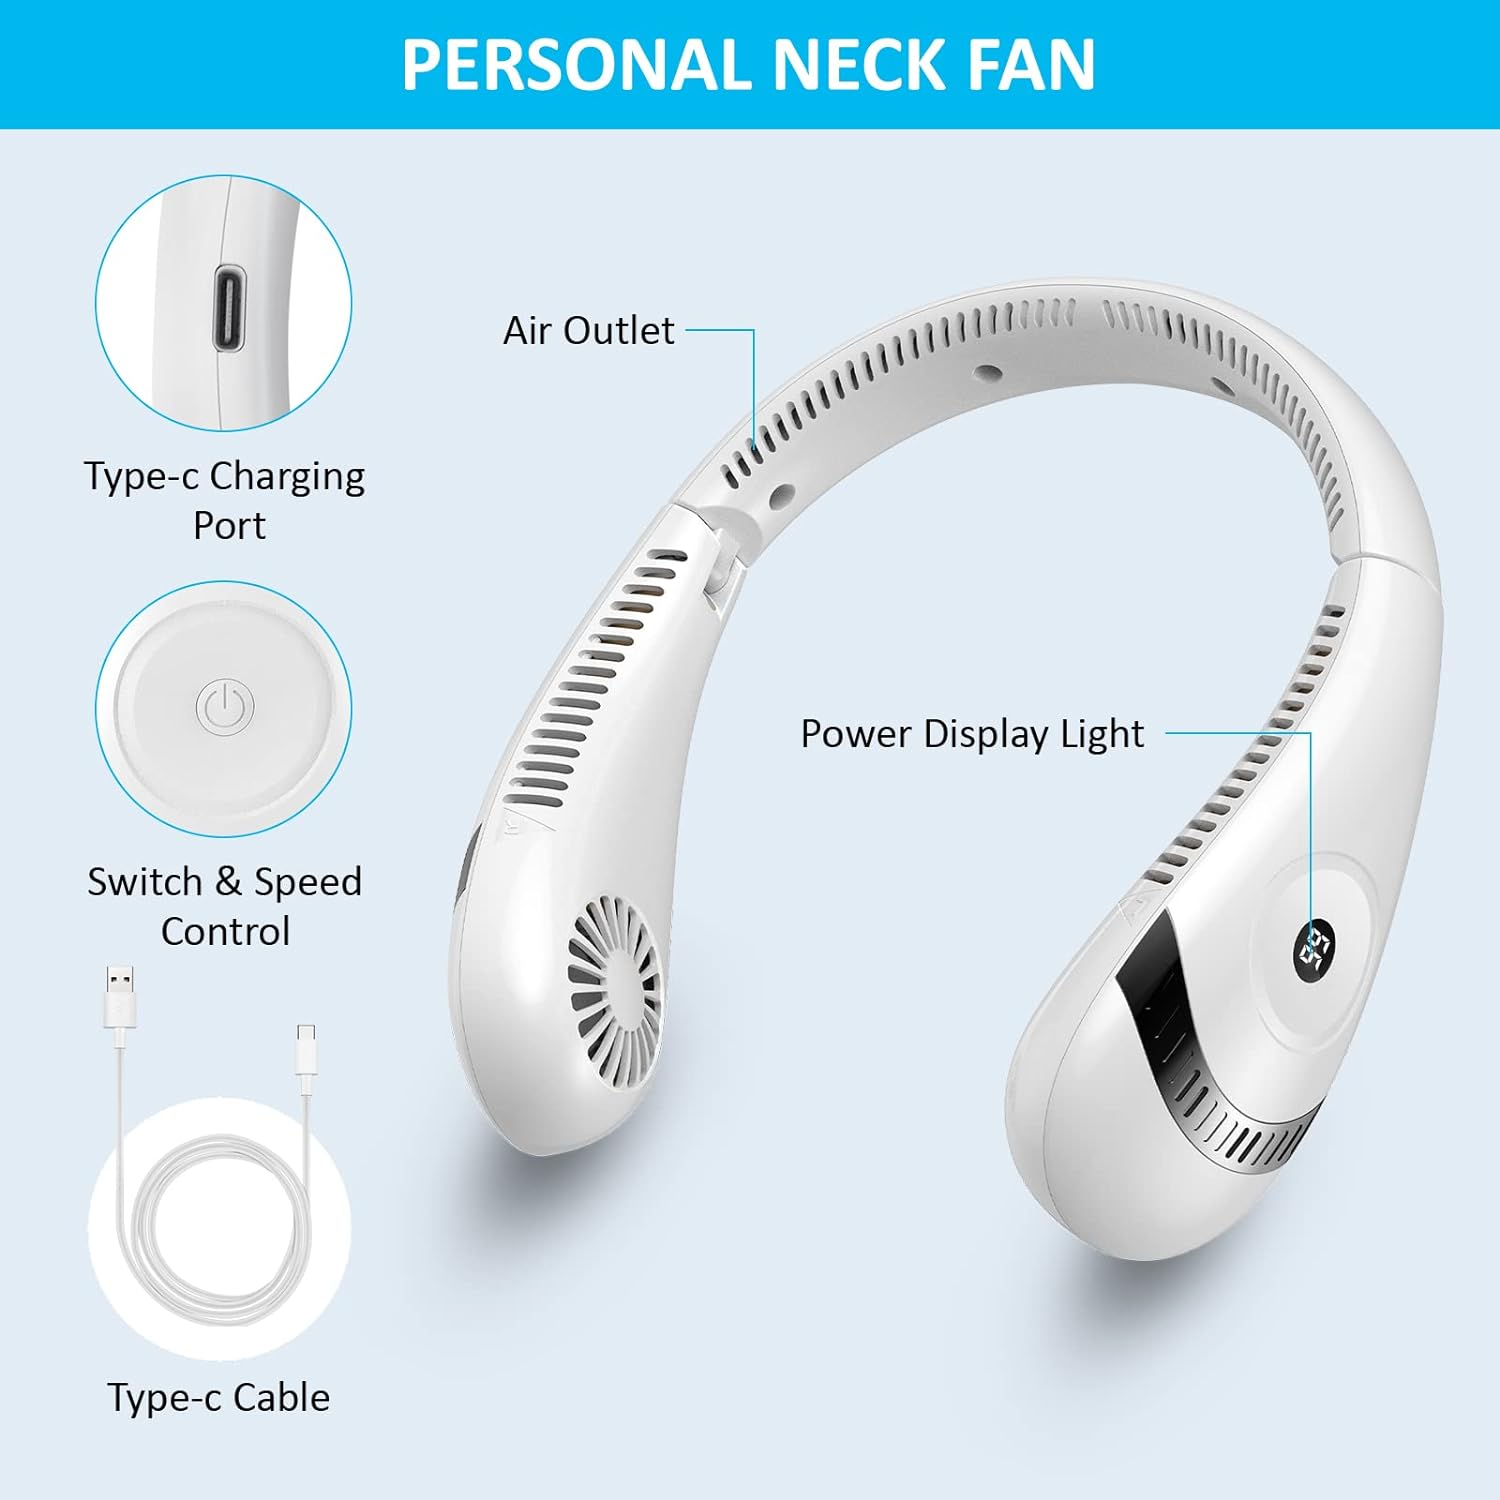 LED-Lighting-Neck-Fan-5000mAh-Foldable-Hands-Free-Bladeless-Wearable-Personal-Fans-Battery-Operated-USB-Rechargeable-LED-Power-Display-for-Outdoor-Travel-Camp-23